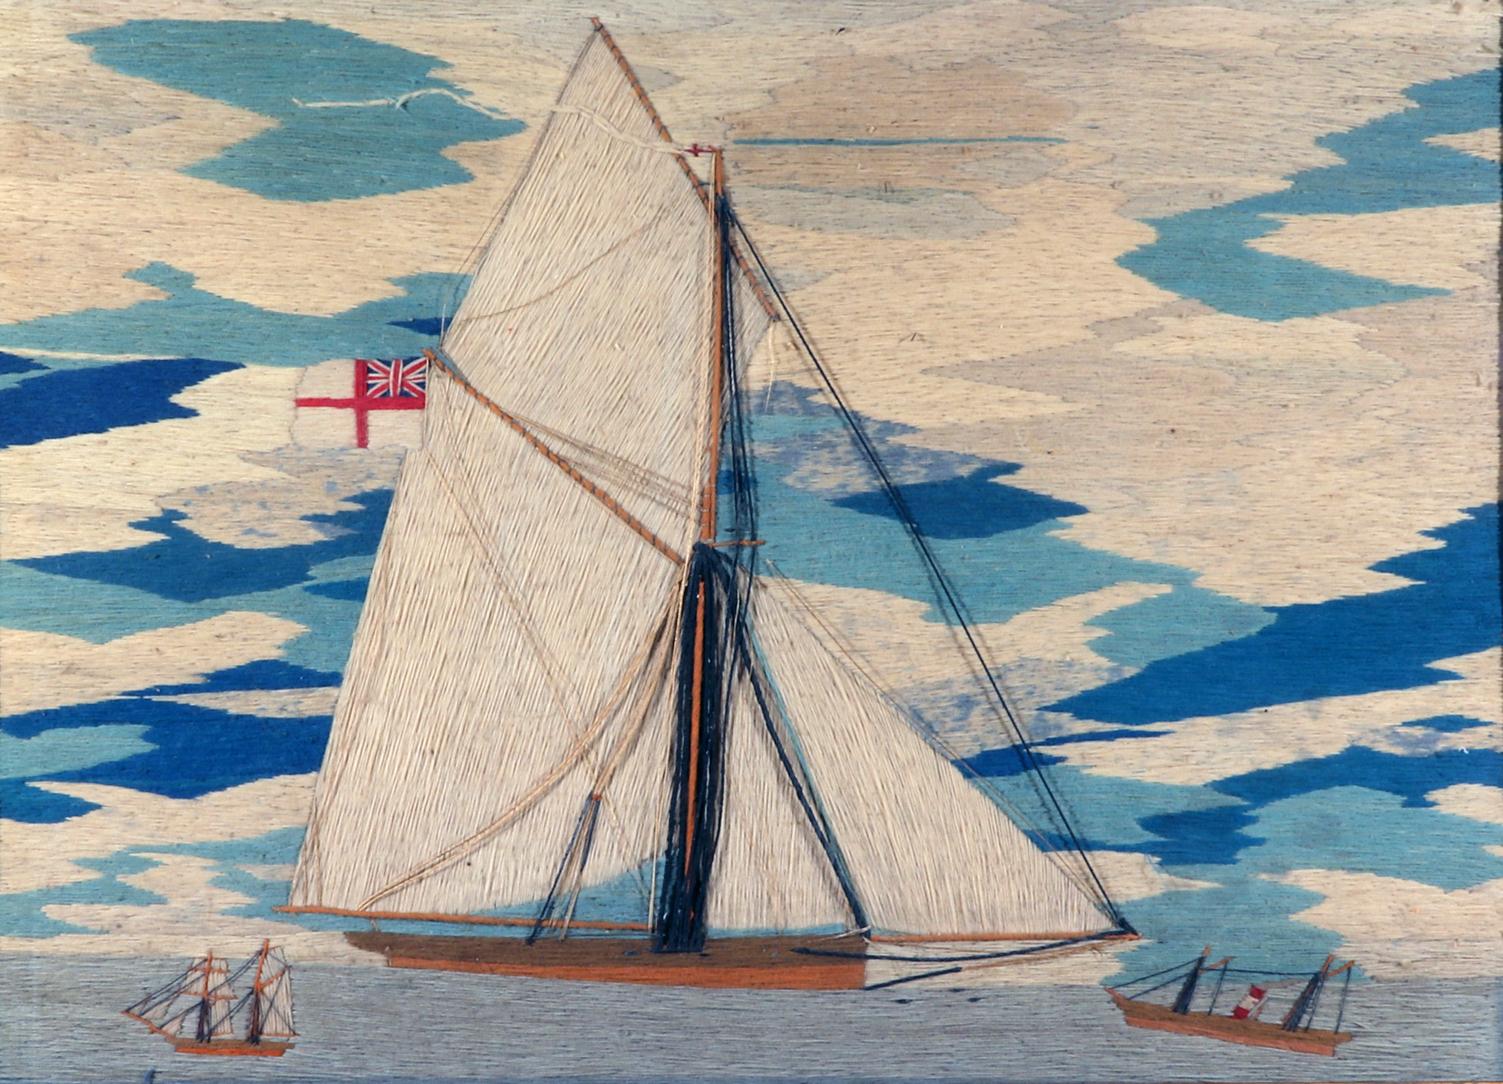 Sailor's Woolwork Woolie of Gaff-rigged Sloop,
Circa 1870

The British sailor's woolwork or woolie depicts a starboard side view of a gaff-rigged sloop under full sail against a cloudy sky with streaks of different blues amongst the white clouds. In